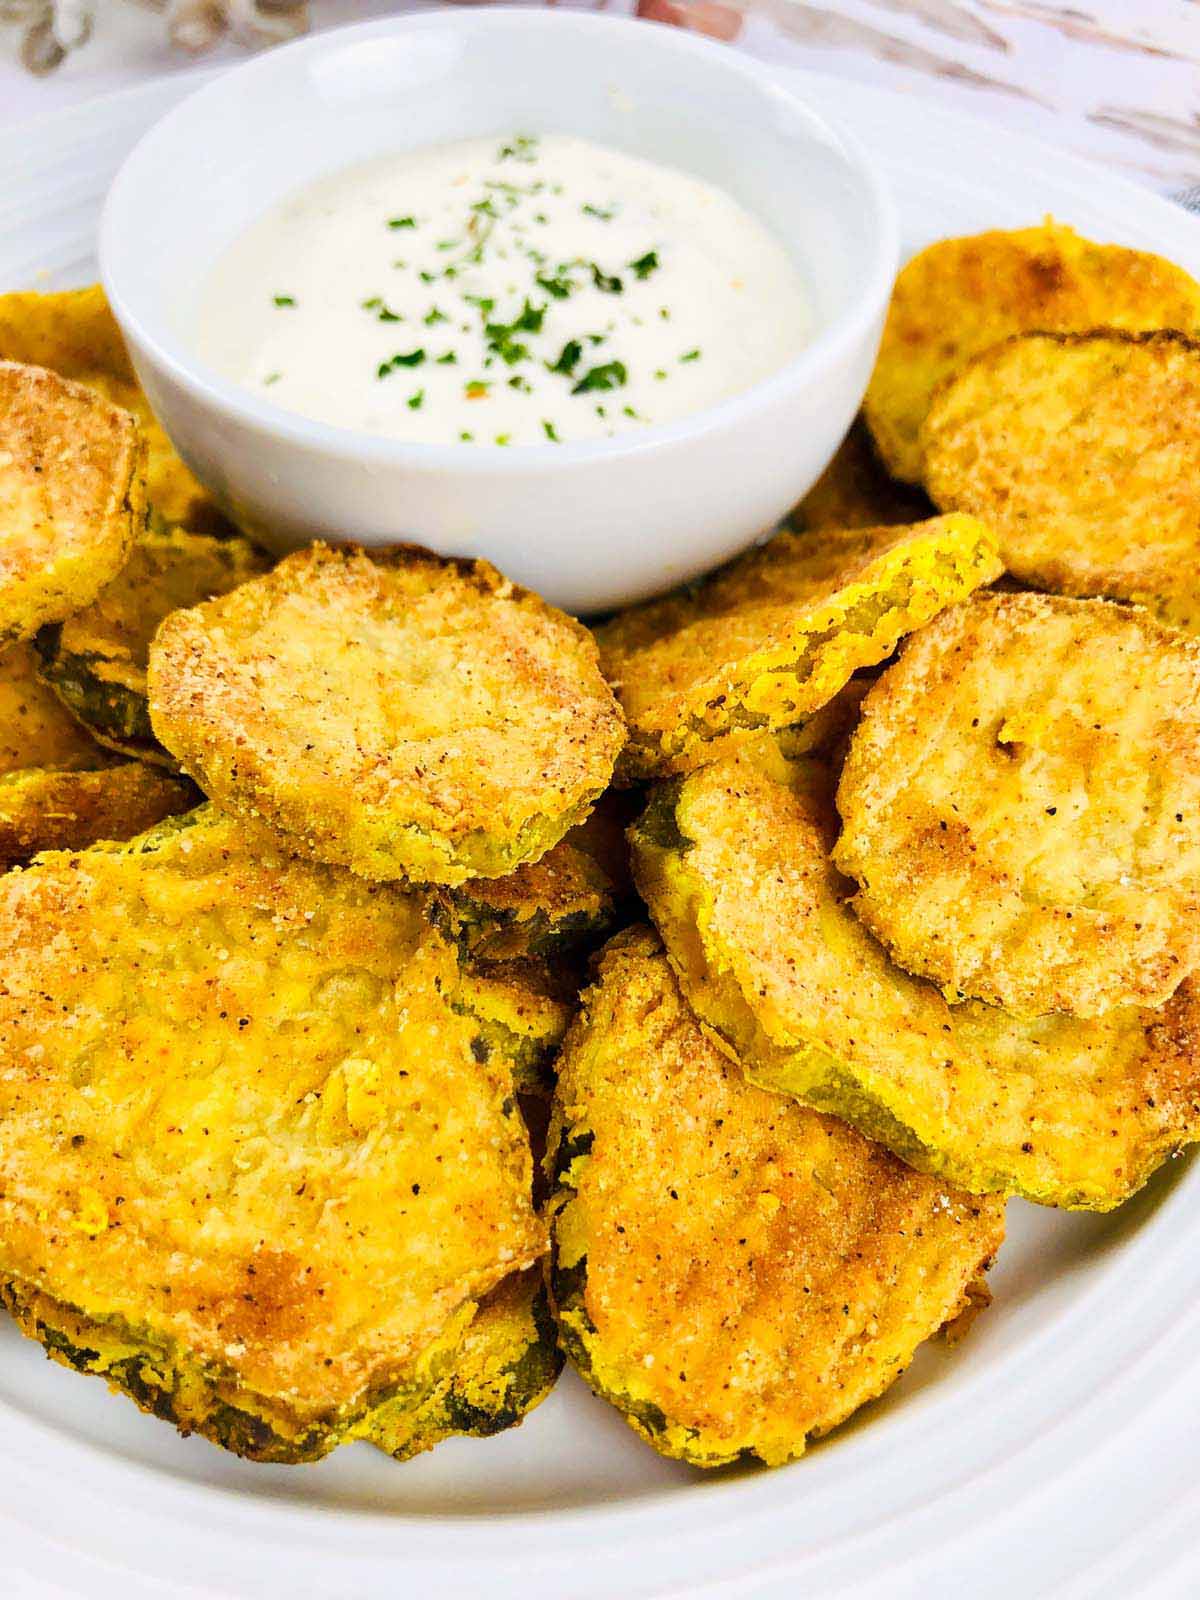 Fried pickles next to a bowl of ranch dip.